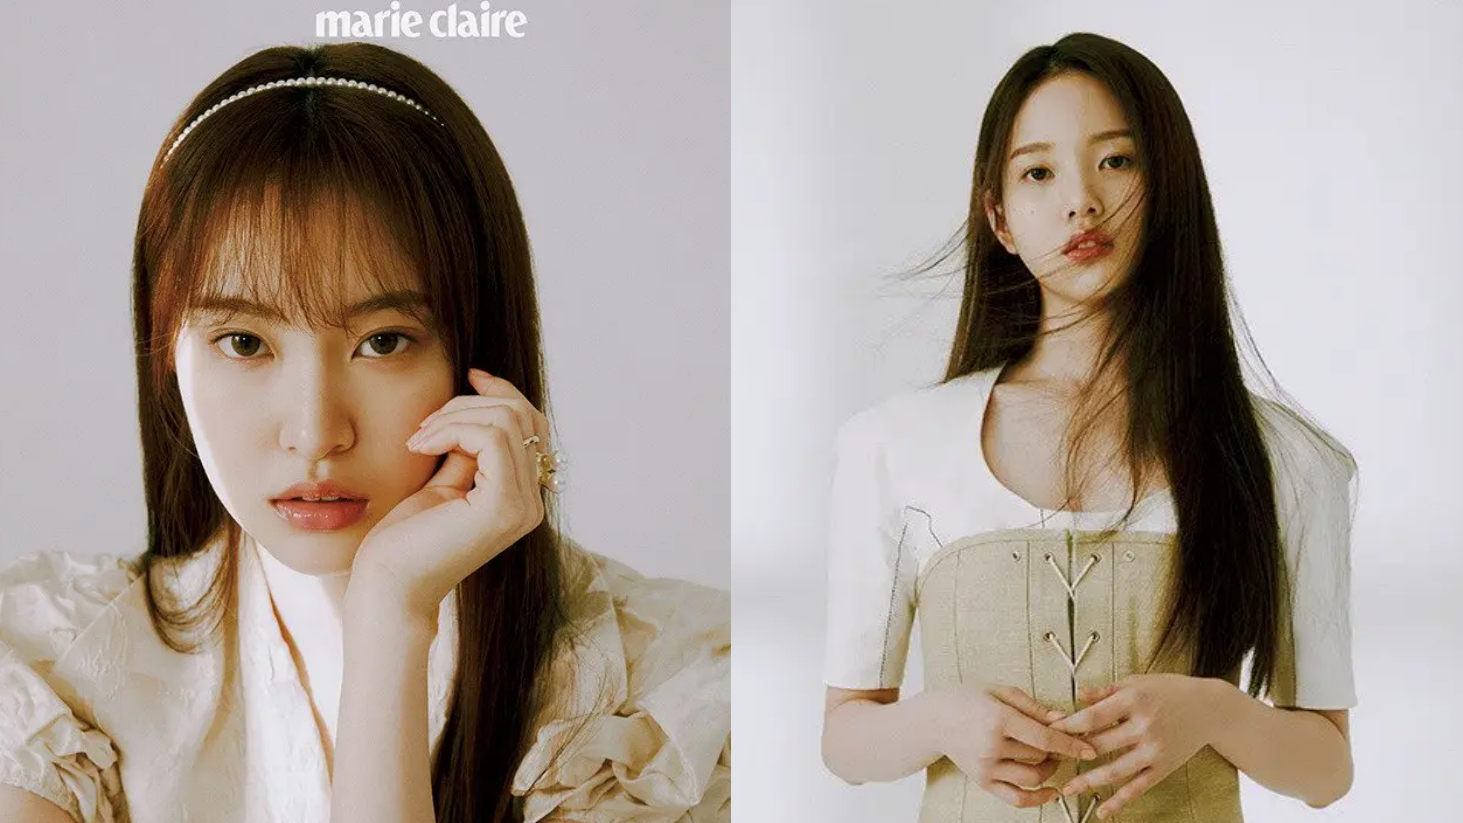 'Marie Claire' Chose Weeekly's Soojin and Zoa to Appear in The Latest Issue of Their Magazine